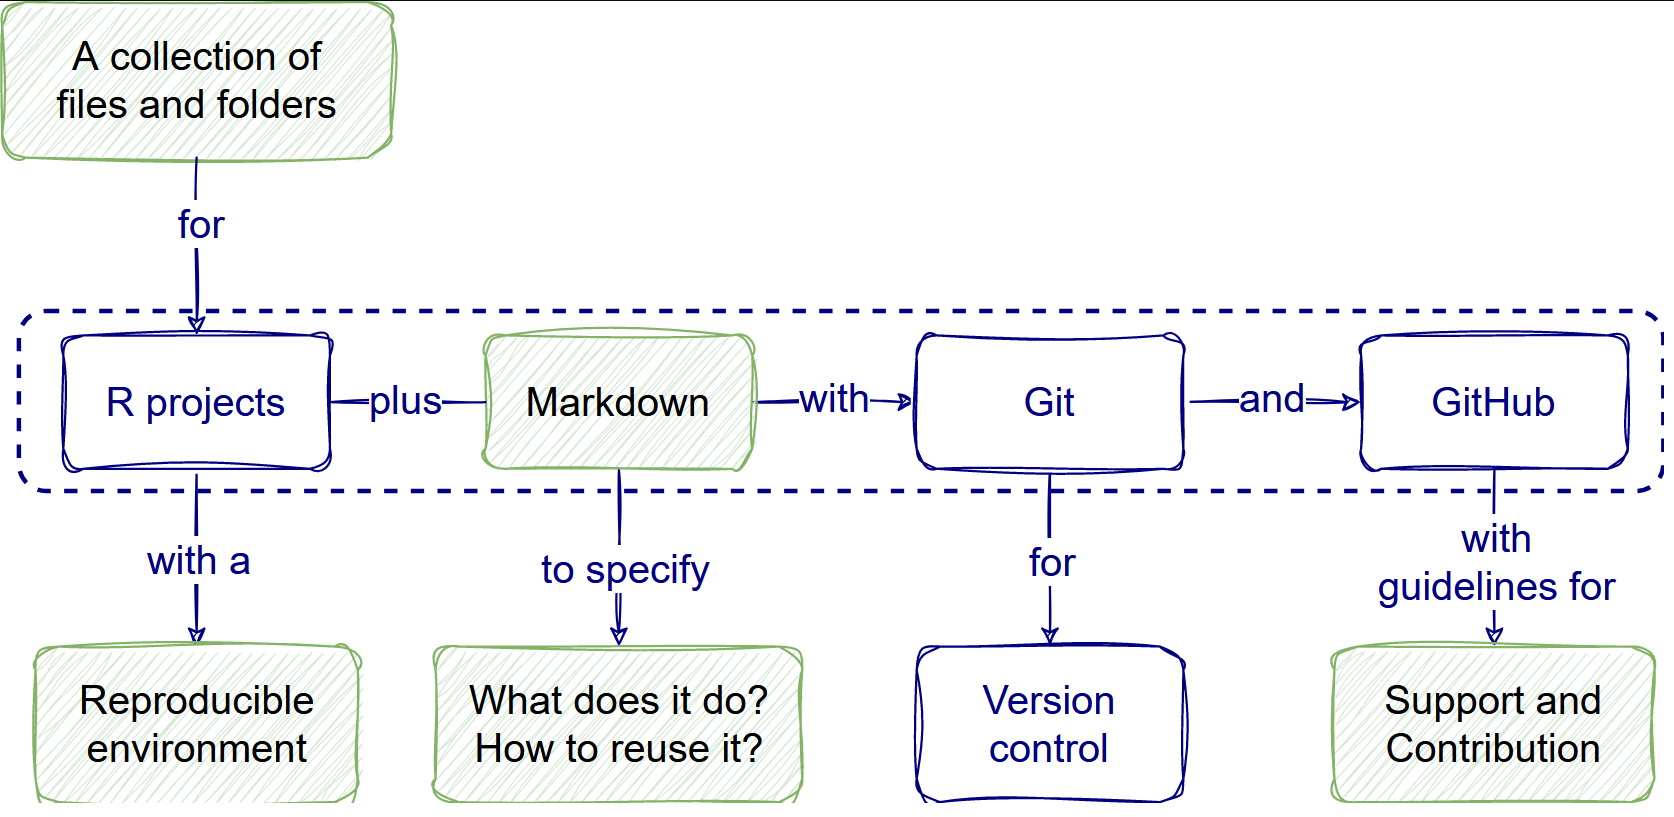 Our vision: Increase the awareness of good practices that complement an R and Git workflow